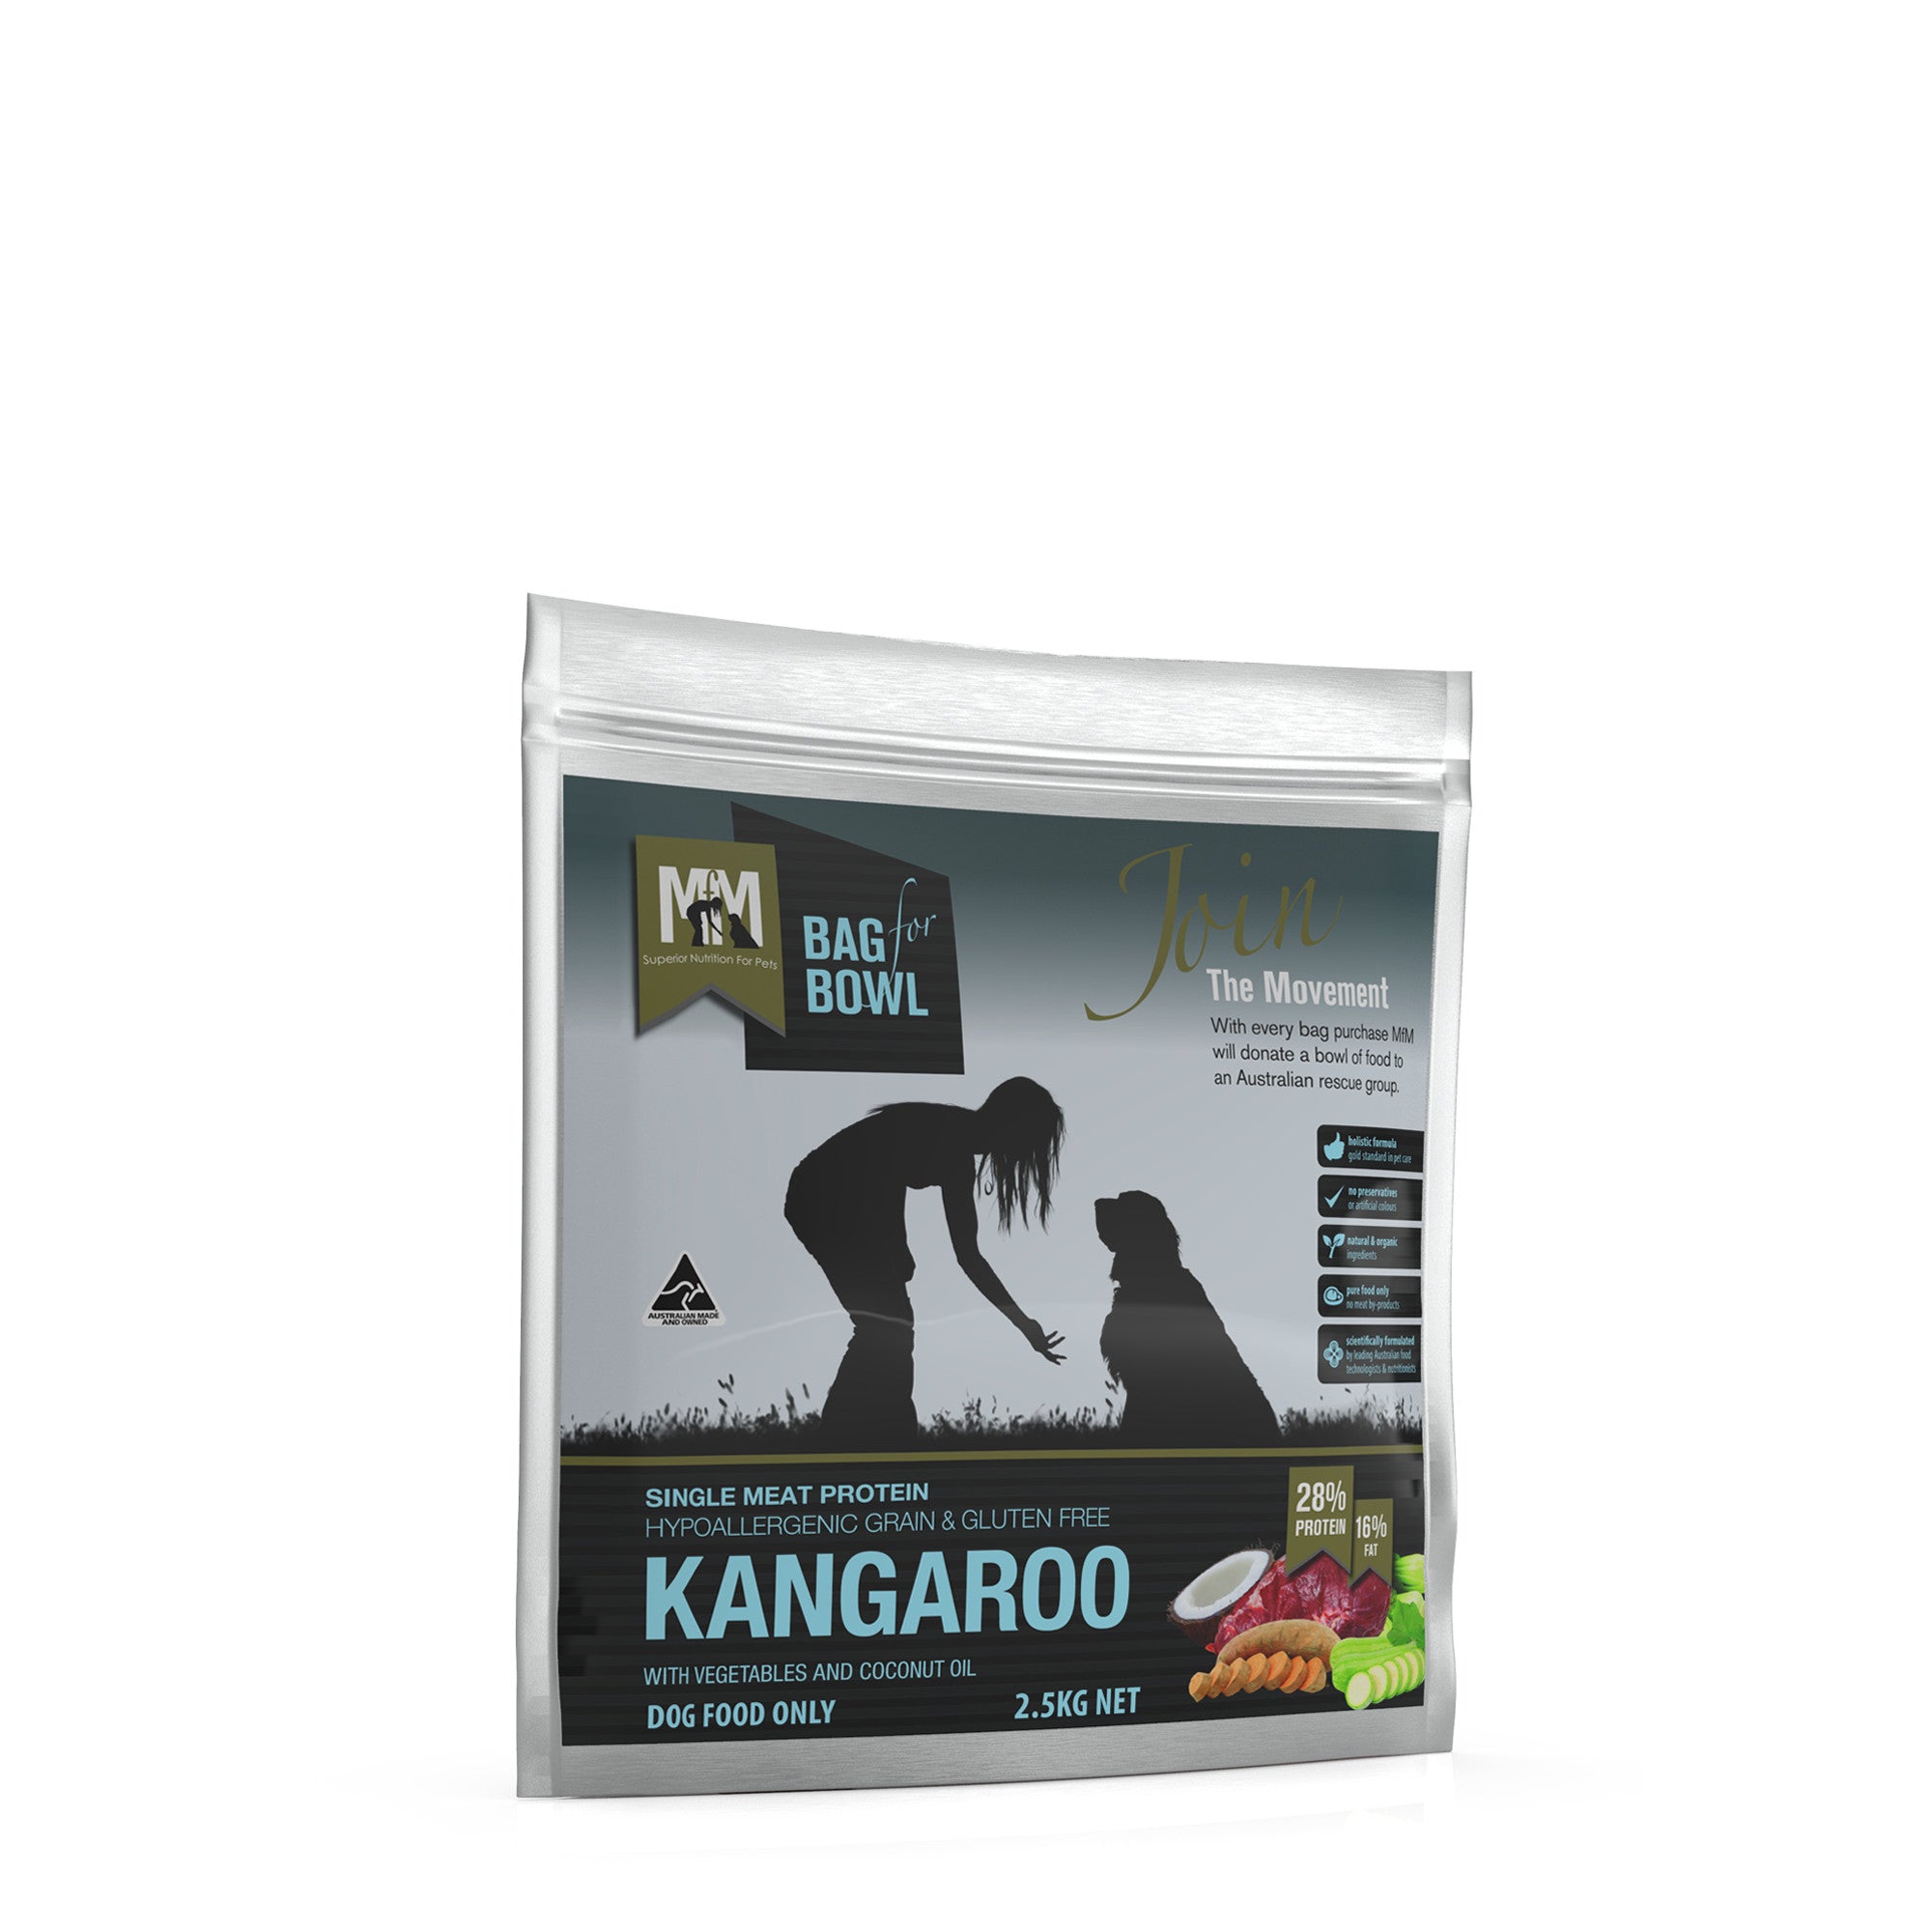 Meals for Mutts Kangaroo Single Meat Protein Dog Food 2.5kg.